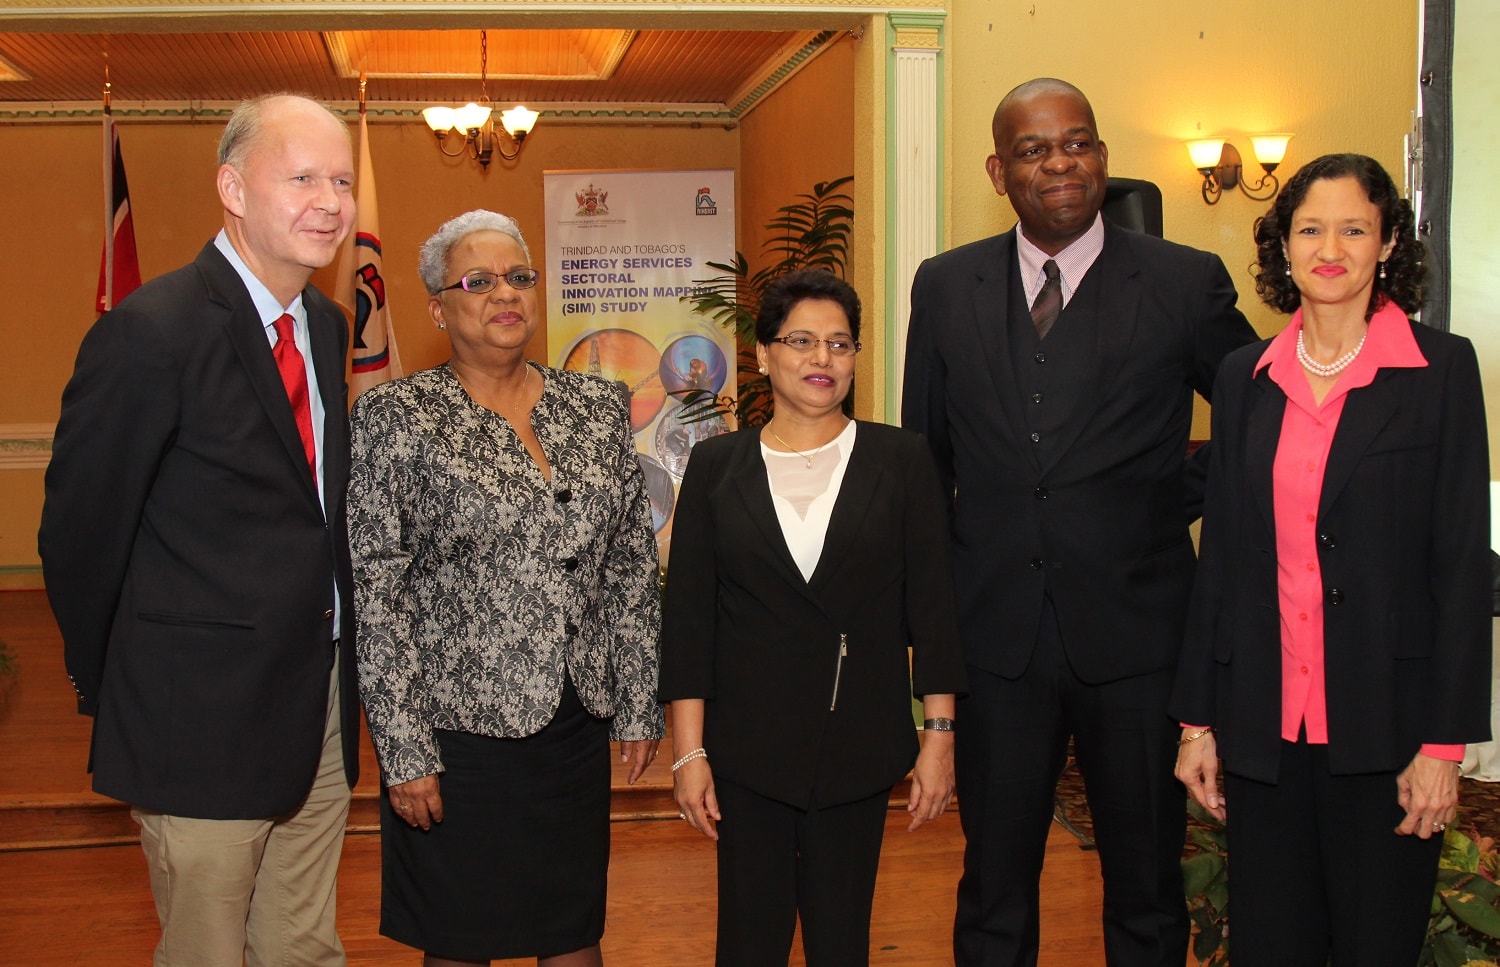 Minister in the Ministry of Education, Hon. Lovell Francis (second from right), Permanent Secretary in the Ministry of Education Ms. Angela Sinaswee-Gervais (second from left), Programme Manager of the EU Delegation Dr. Ulrich Thiessen (left), NIHERST President (Ag.) Ms. Sylvia Lalla (centre) and NIHERST Senior HR Officer Mrs. Giselle Dinzey (right), share a light moment as they welcome this type of research.